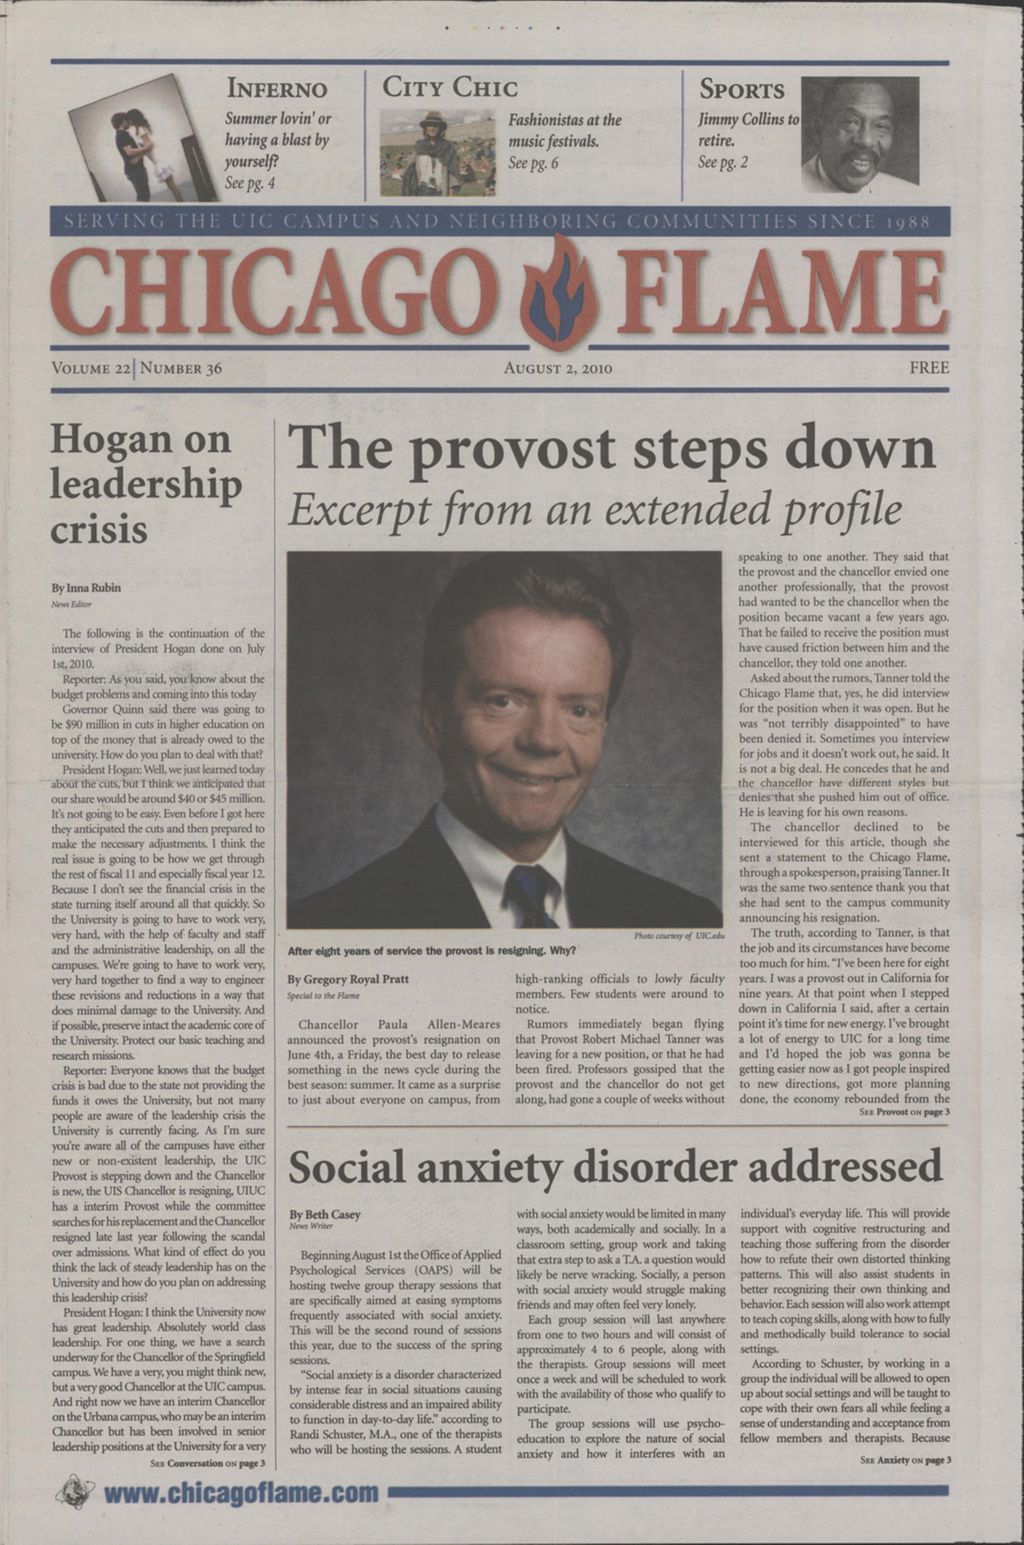 Chicago Flame (August 2, 2010)